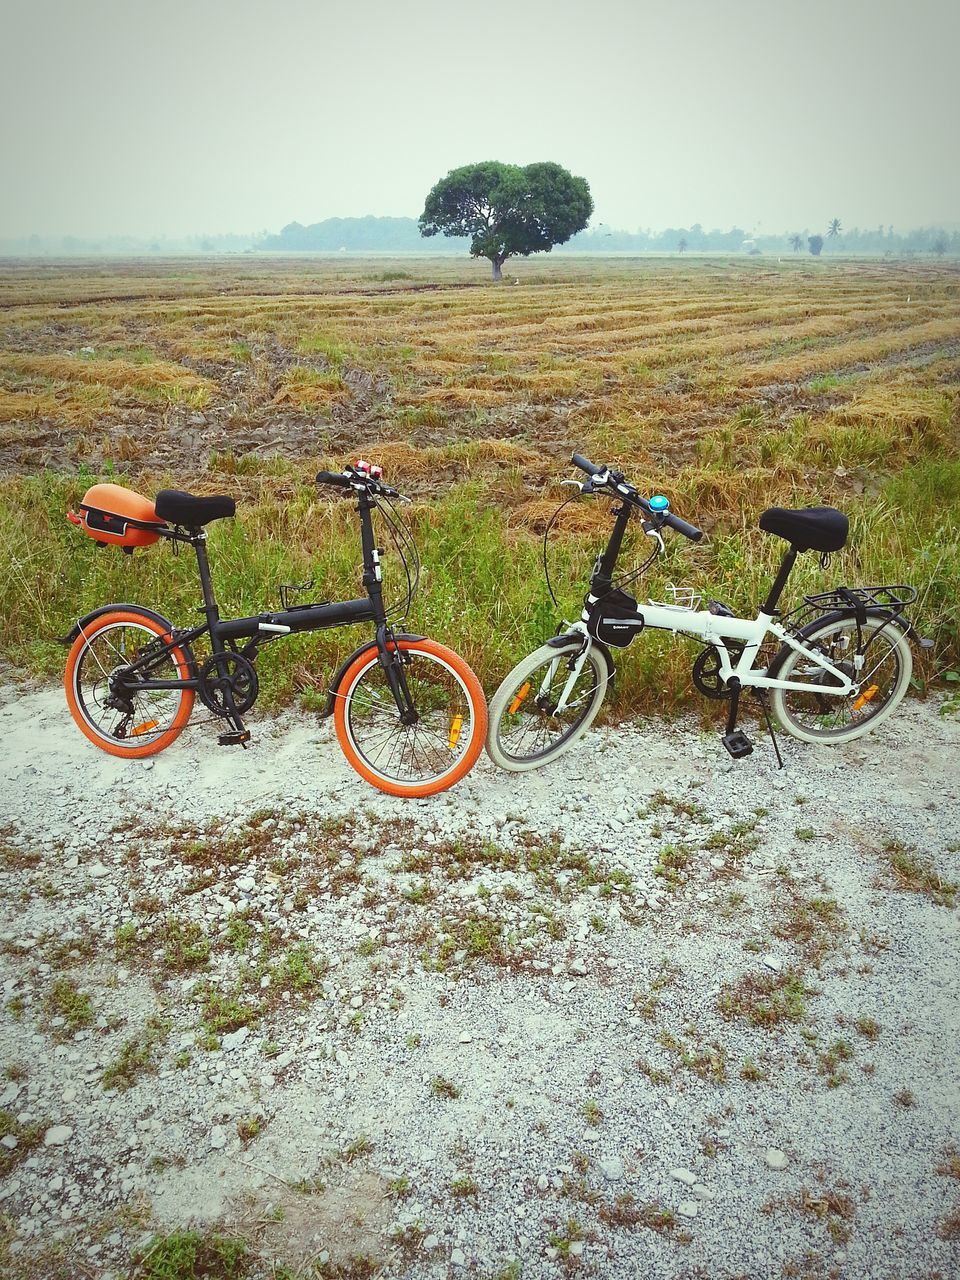 BICYCLES PARKED ON DIRT ROAD